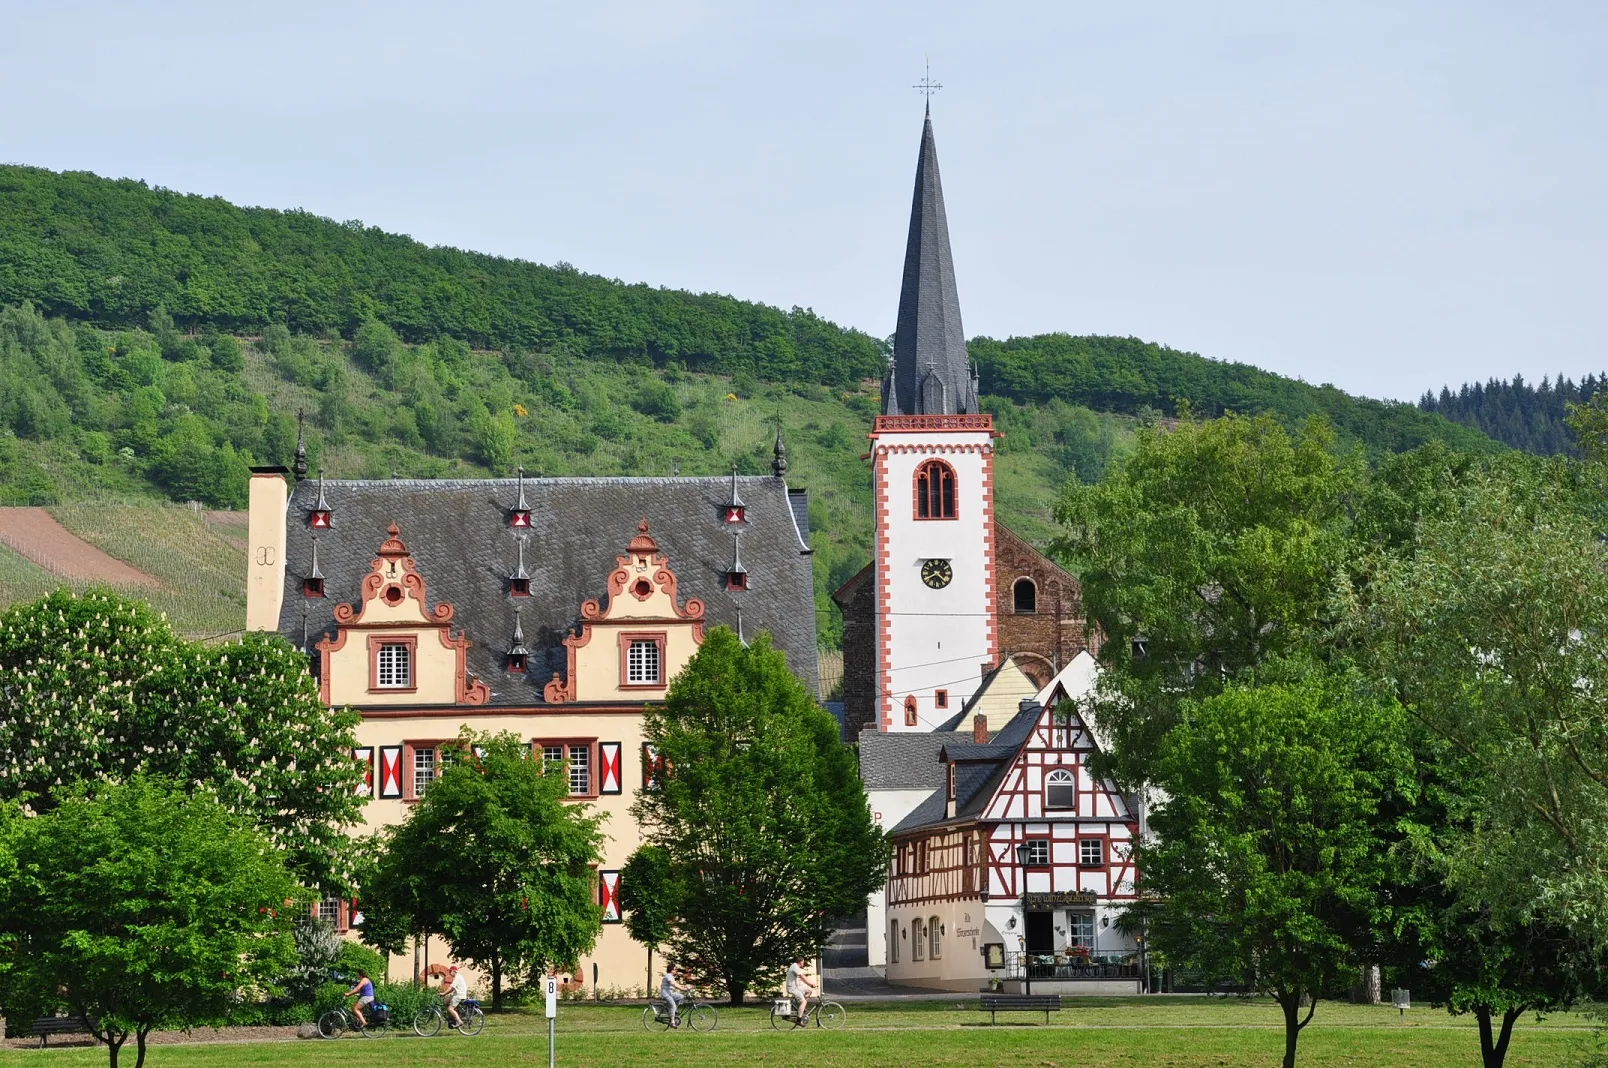 Photo showing: Bruttig-Fankel as seen from the river Moselle (Cochem-Zell district, Rhineland-Palatinate, Germany).
The image shows a part of Bruttig.